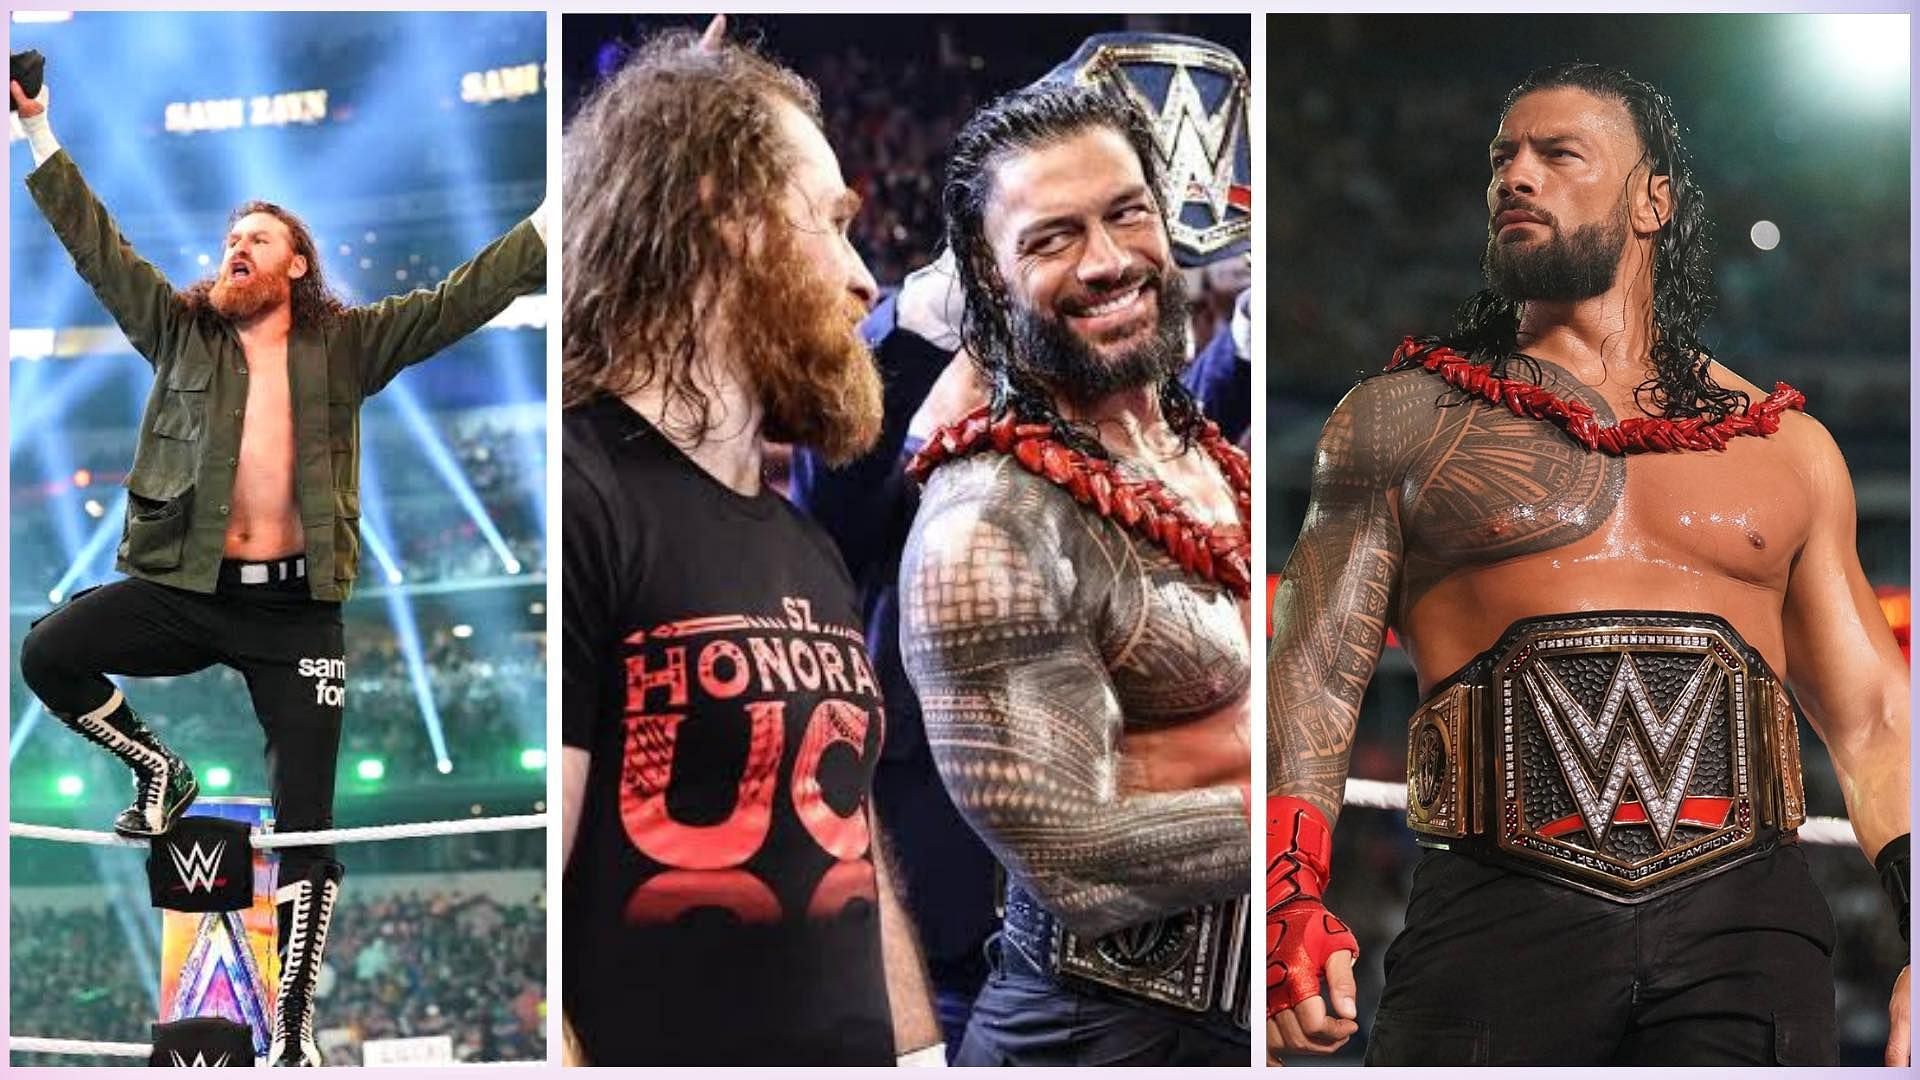 11 new shows including the WWE Elimination Chamber 2023 event are coming to streaming platforms this weekend